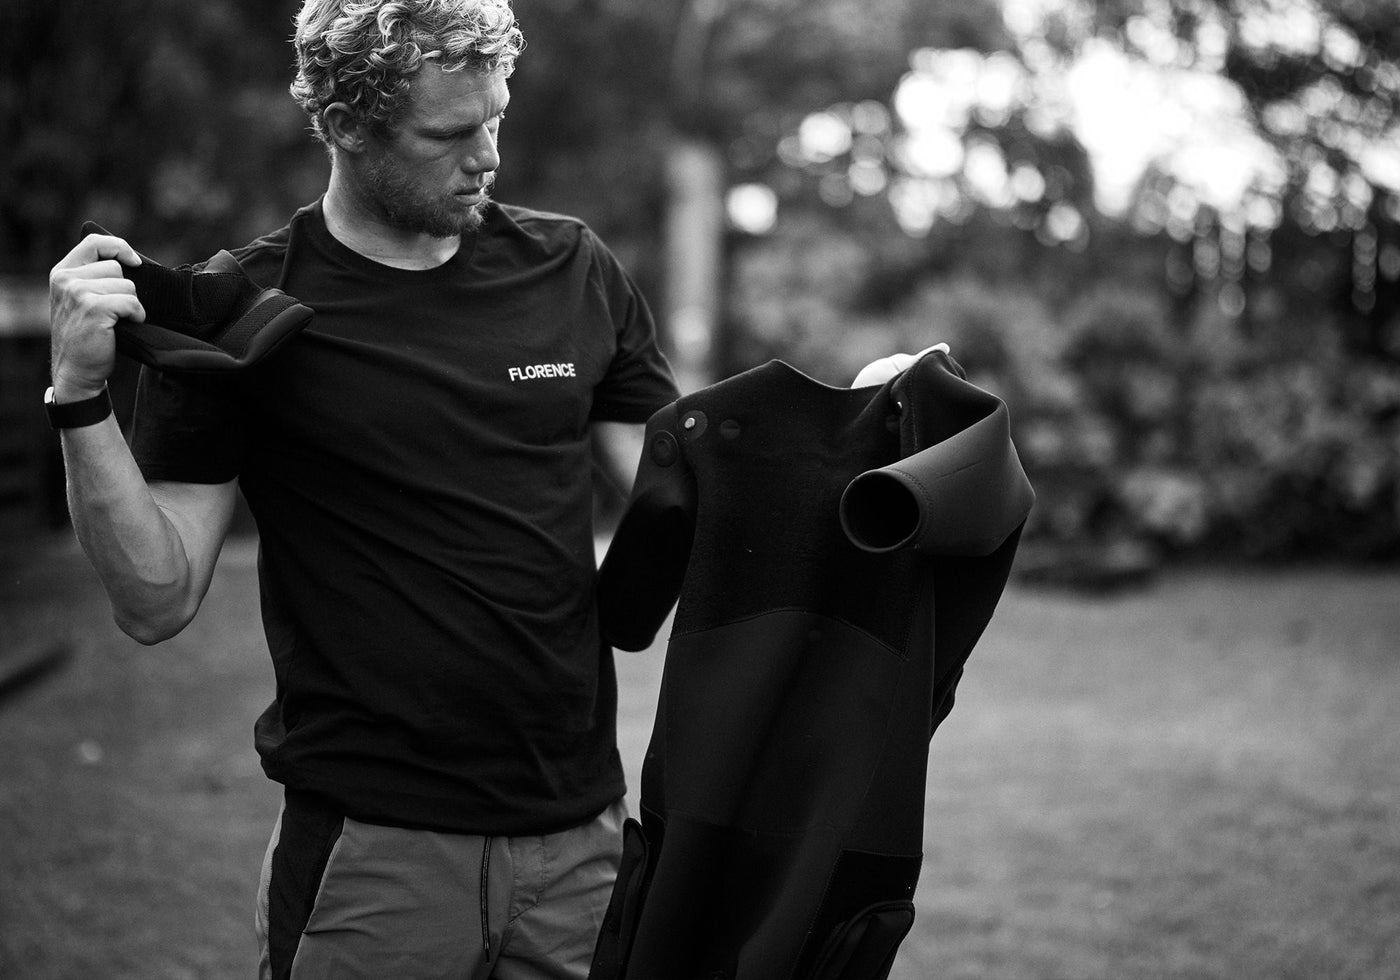 John Florence putting together his Florence Impact Suit before the Eddie Invitational